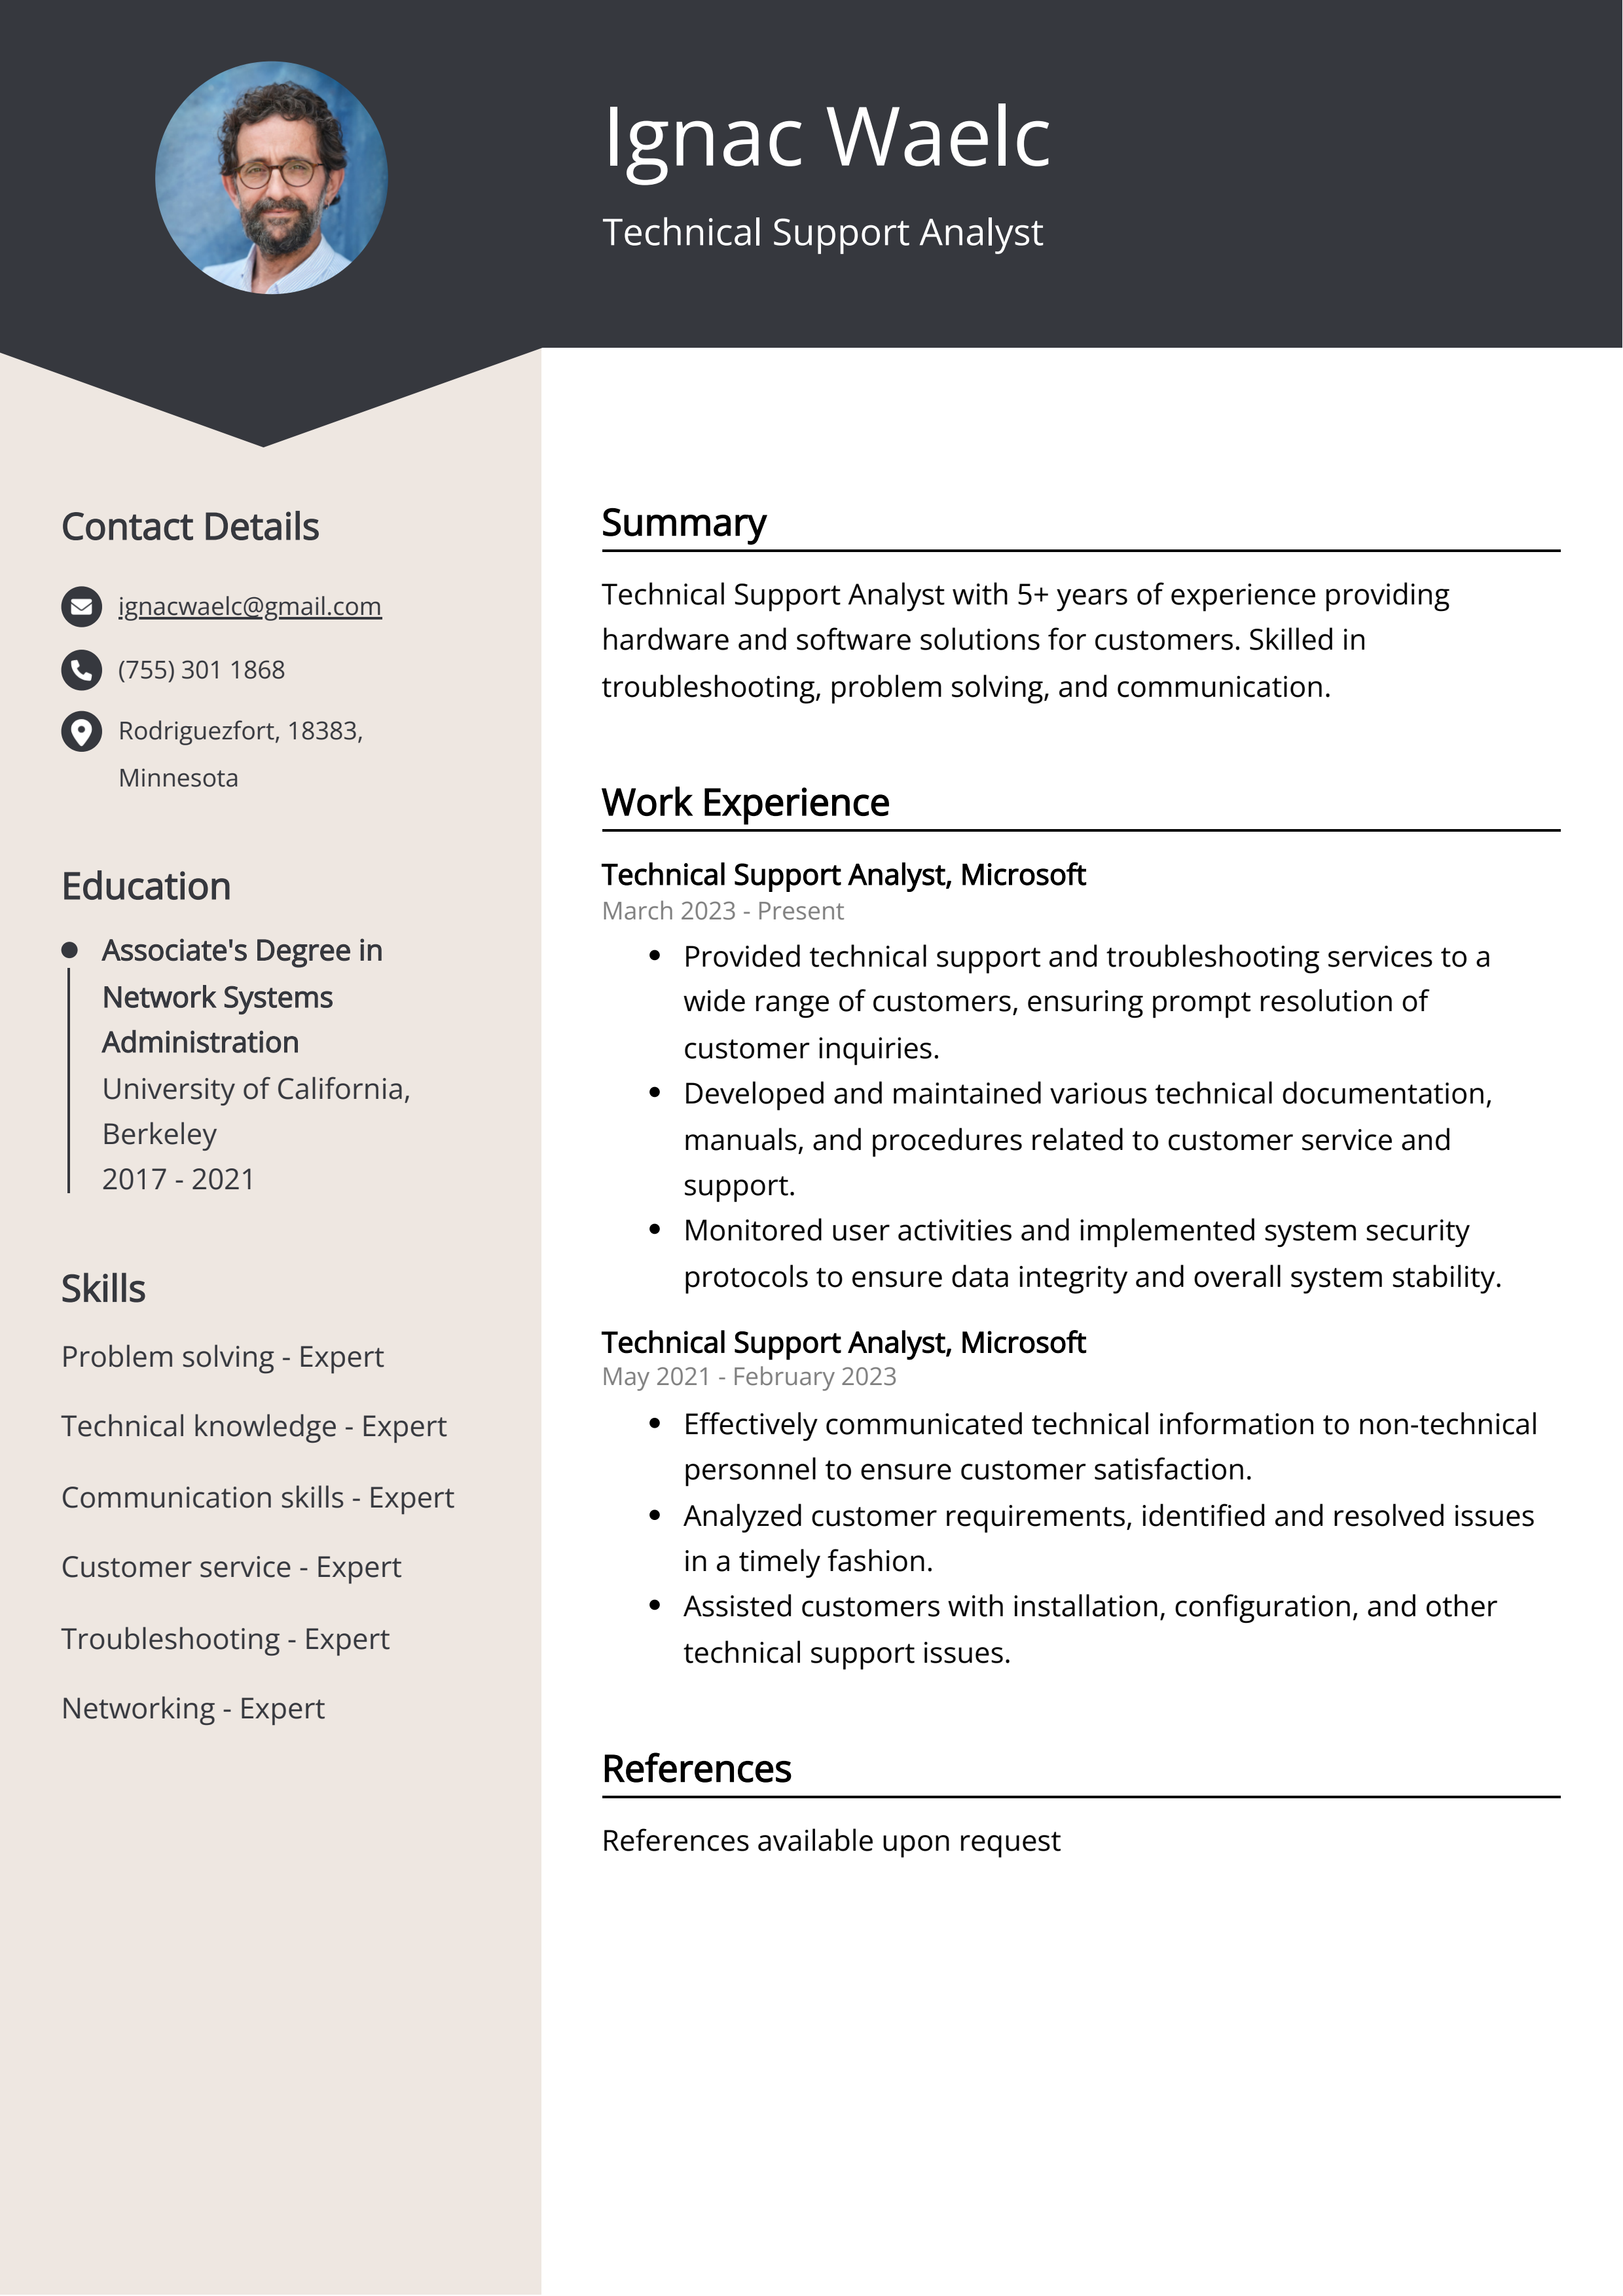 Technical Support Analyst CV Example